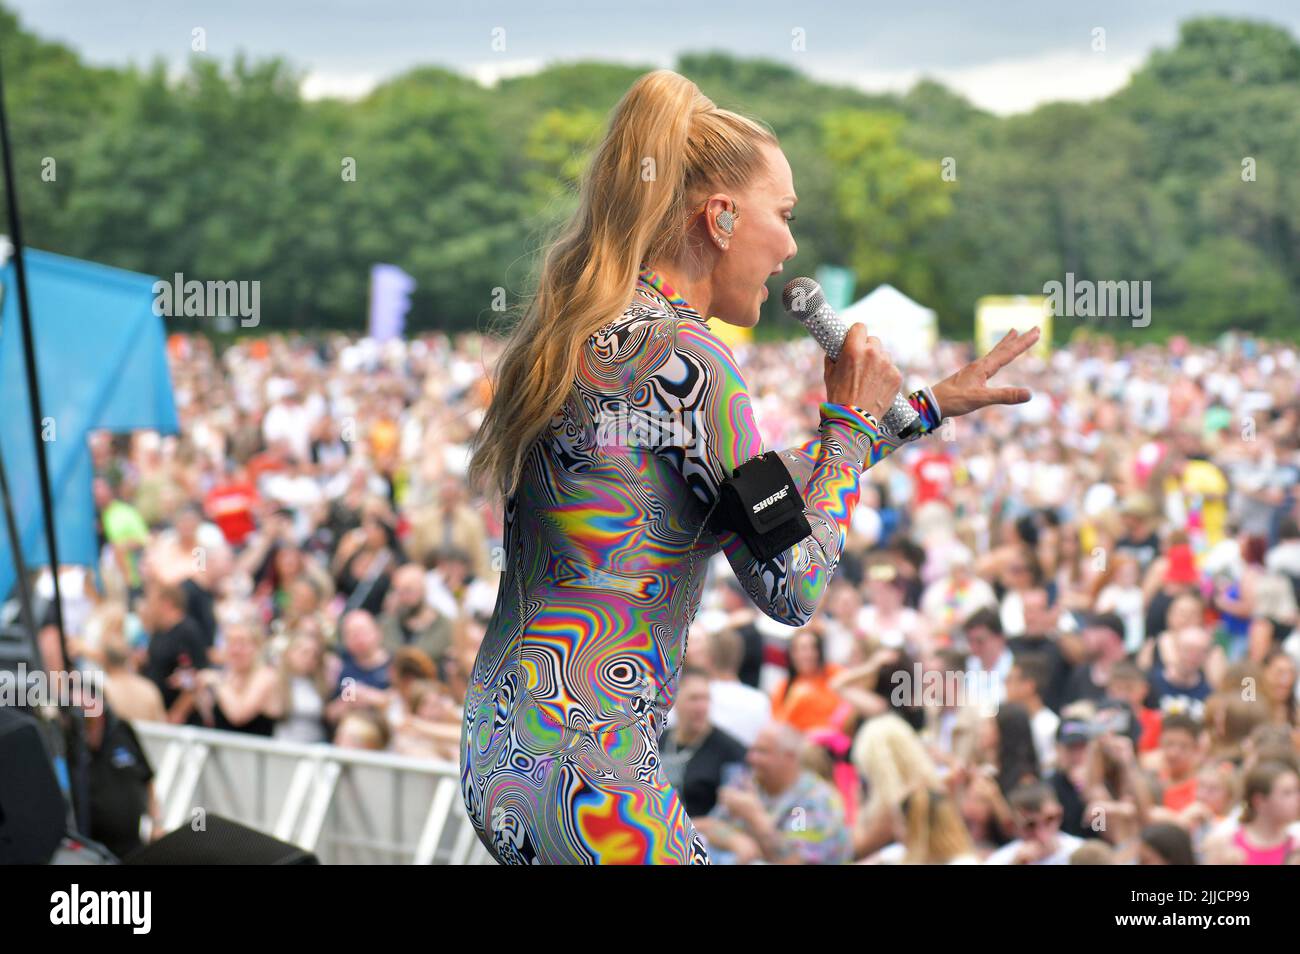 90s Singer Whigfeild performed live at Bents Park, South Tyneside Music Festival, North East, UK, July 2022 Stock Photo